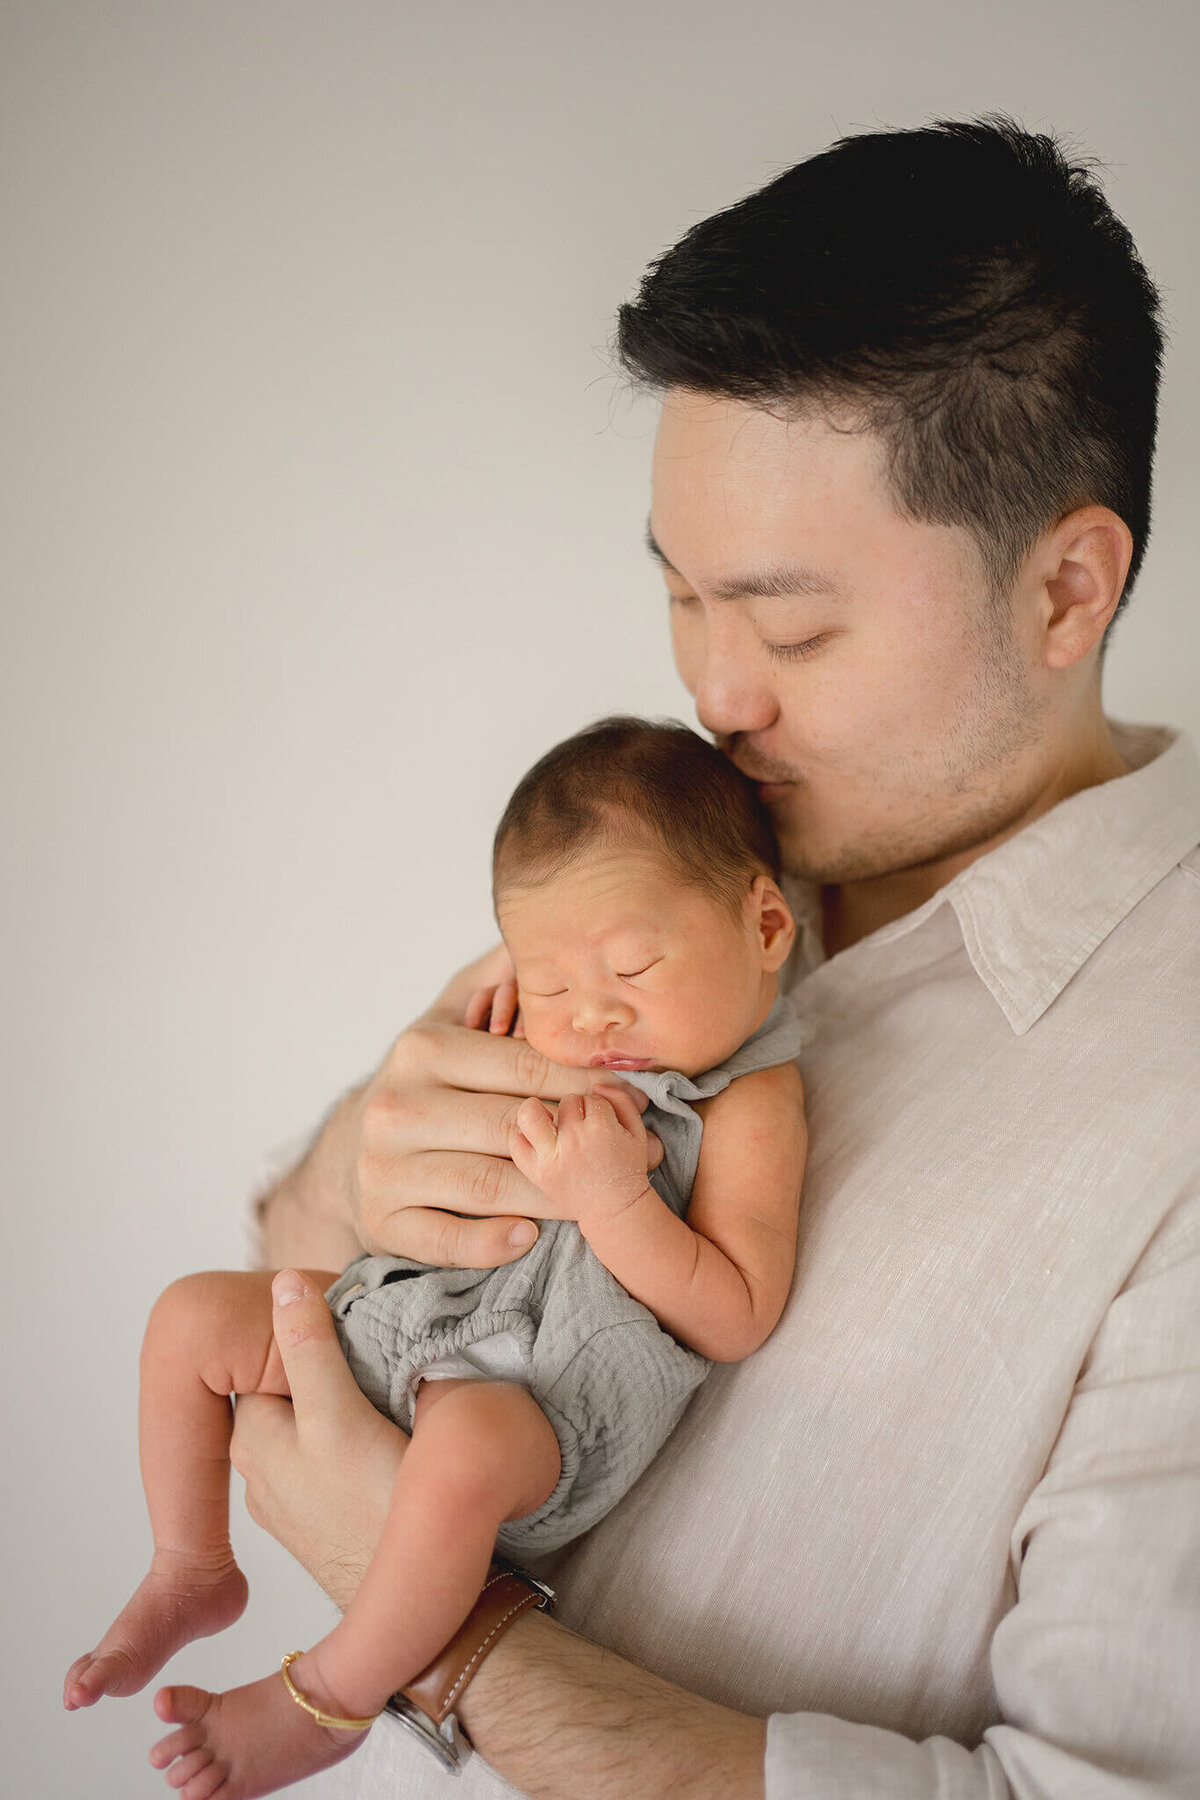 asian dad snuggling with newborn baby in their nursery, captured by maternity photographer hikari lifestyle photography.